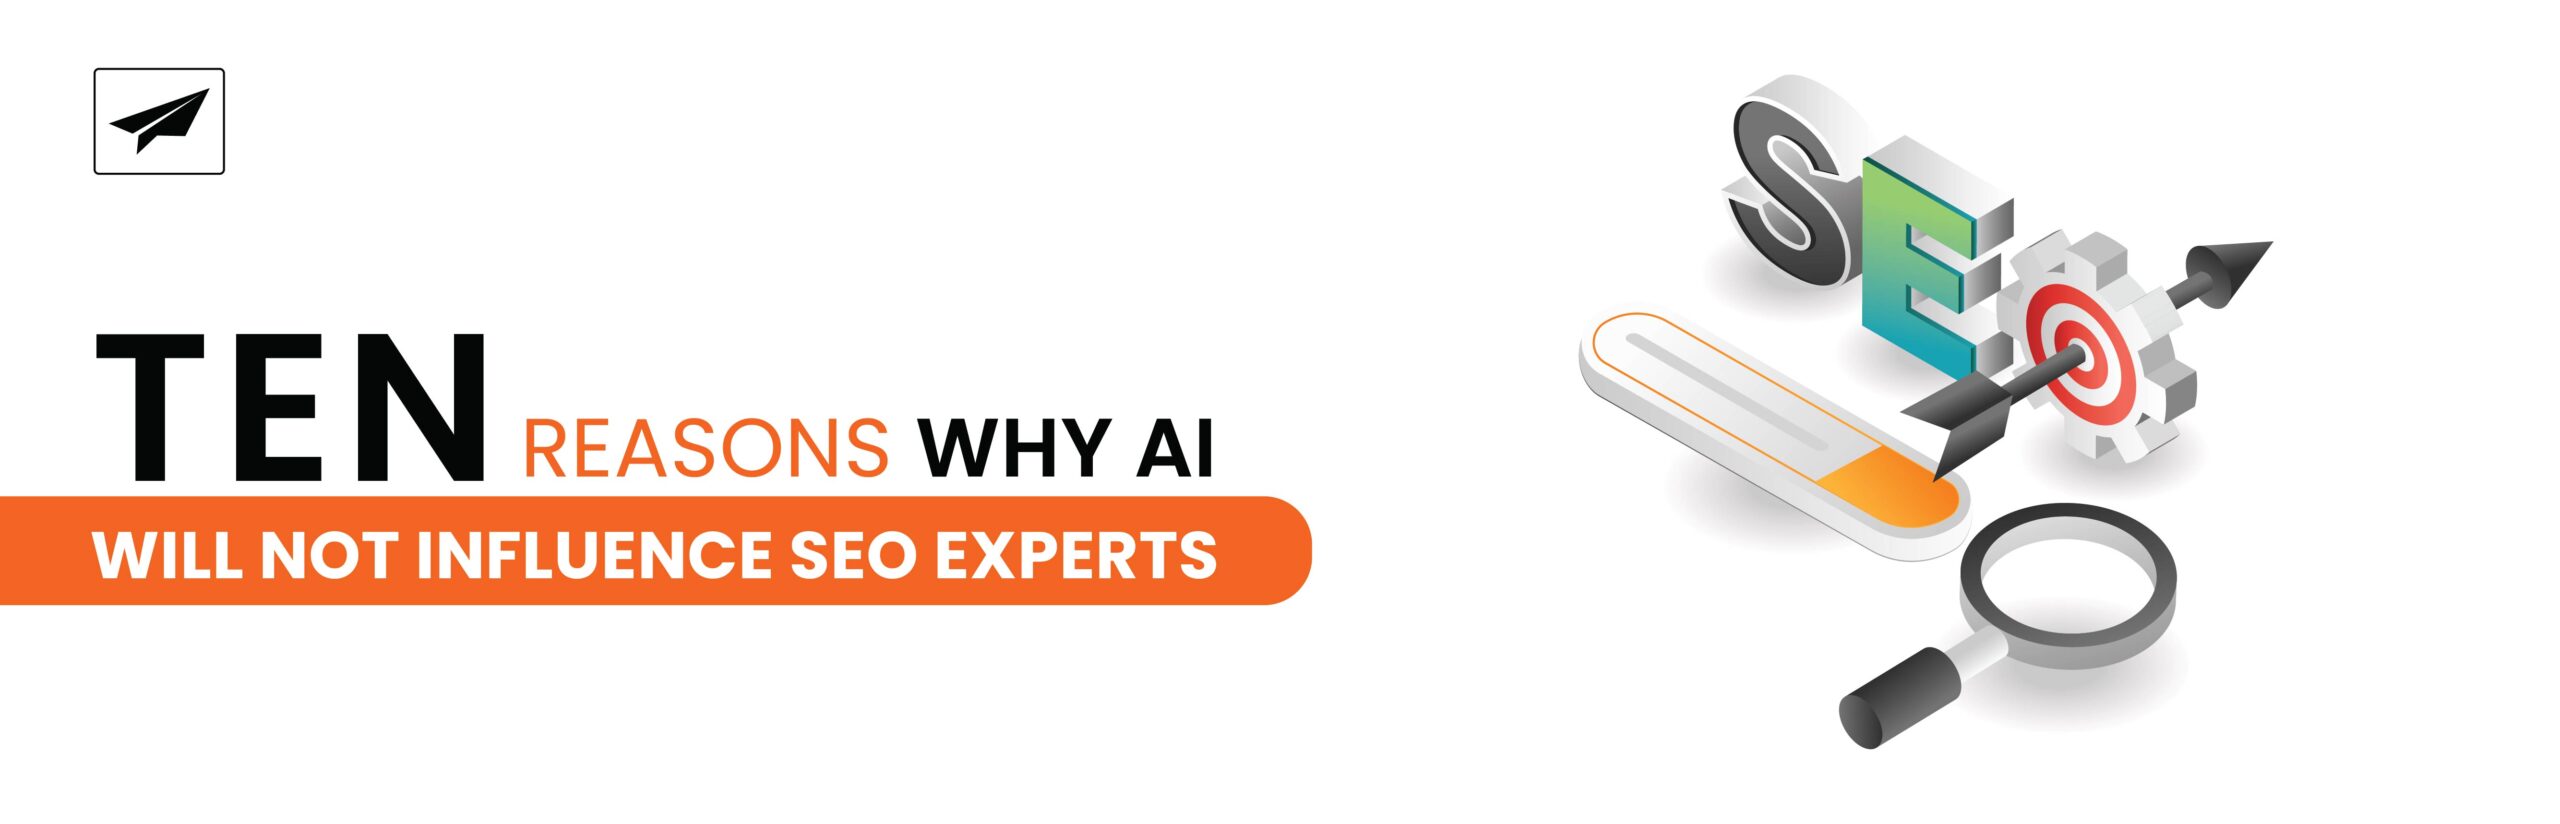 Ten reasons why AI will not influence SEO experts